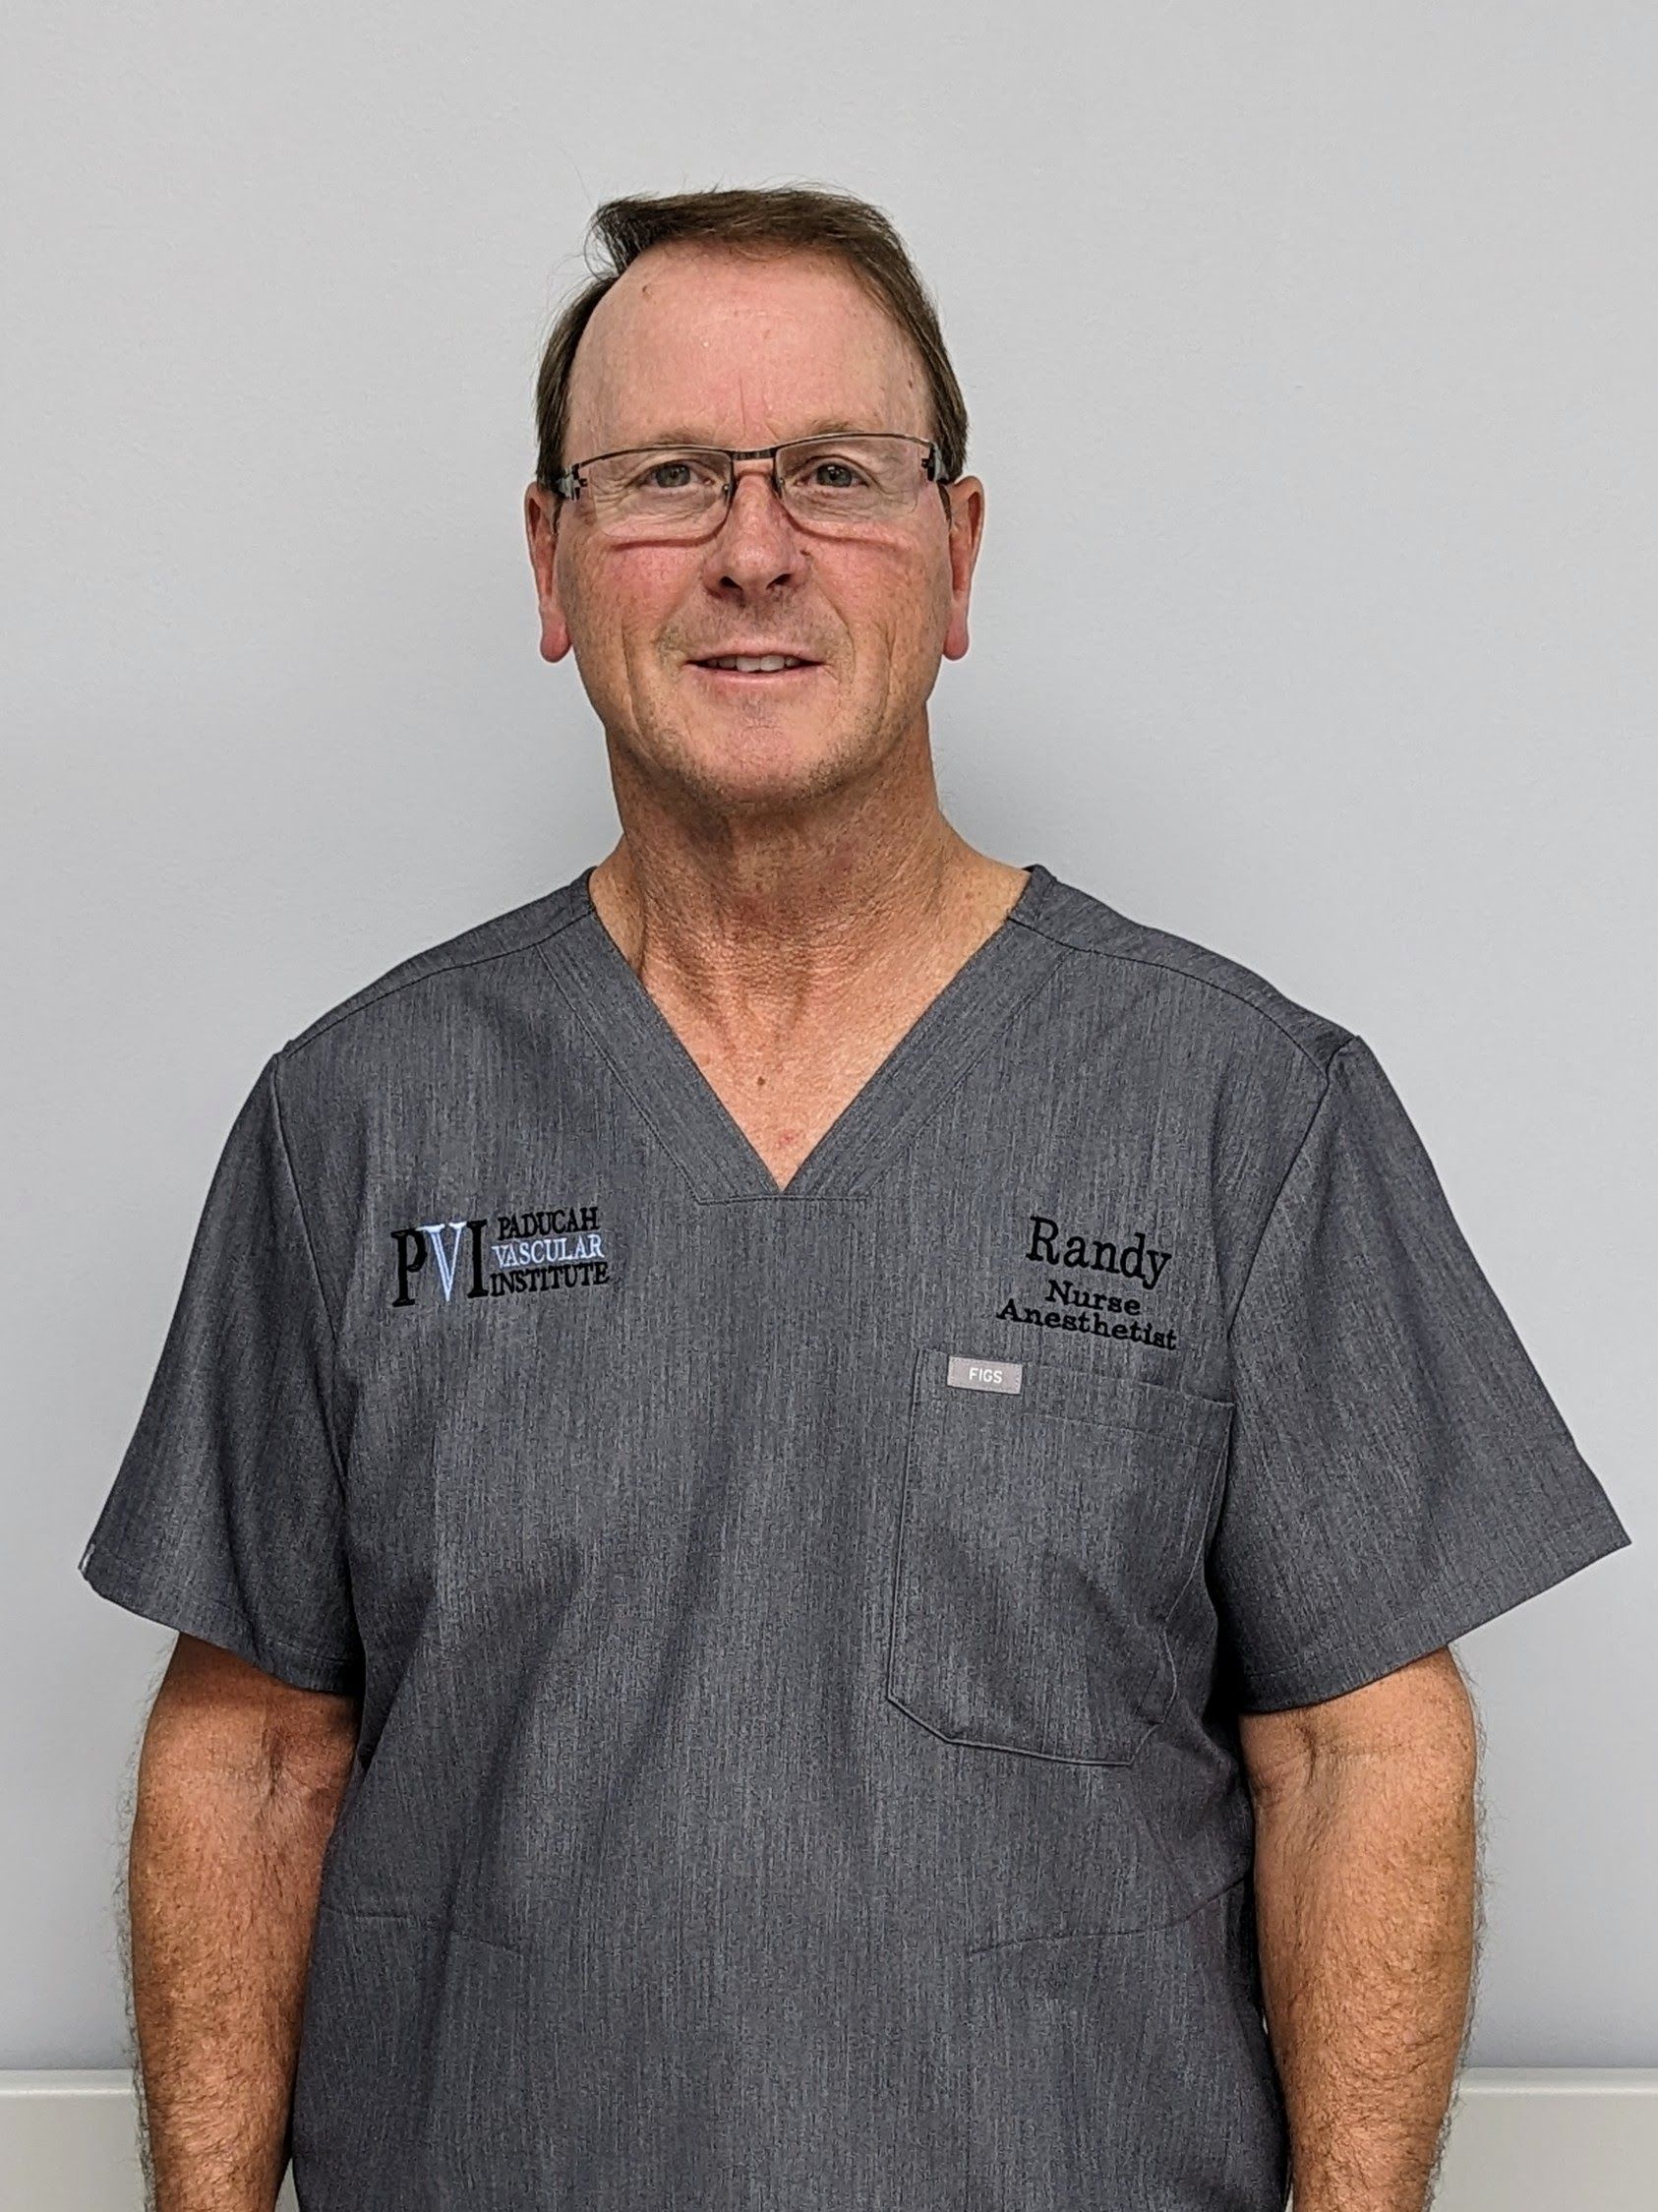 Randy Wientjes, CRNA, a man wearing a scrub top with paducah vascular institute logo on it